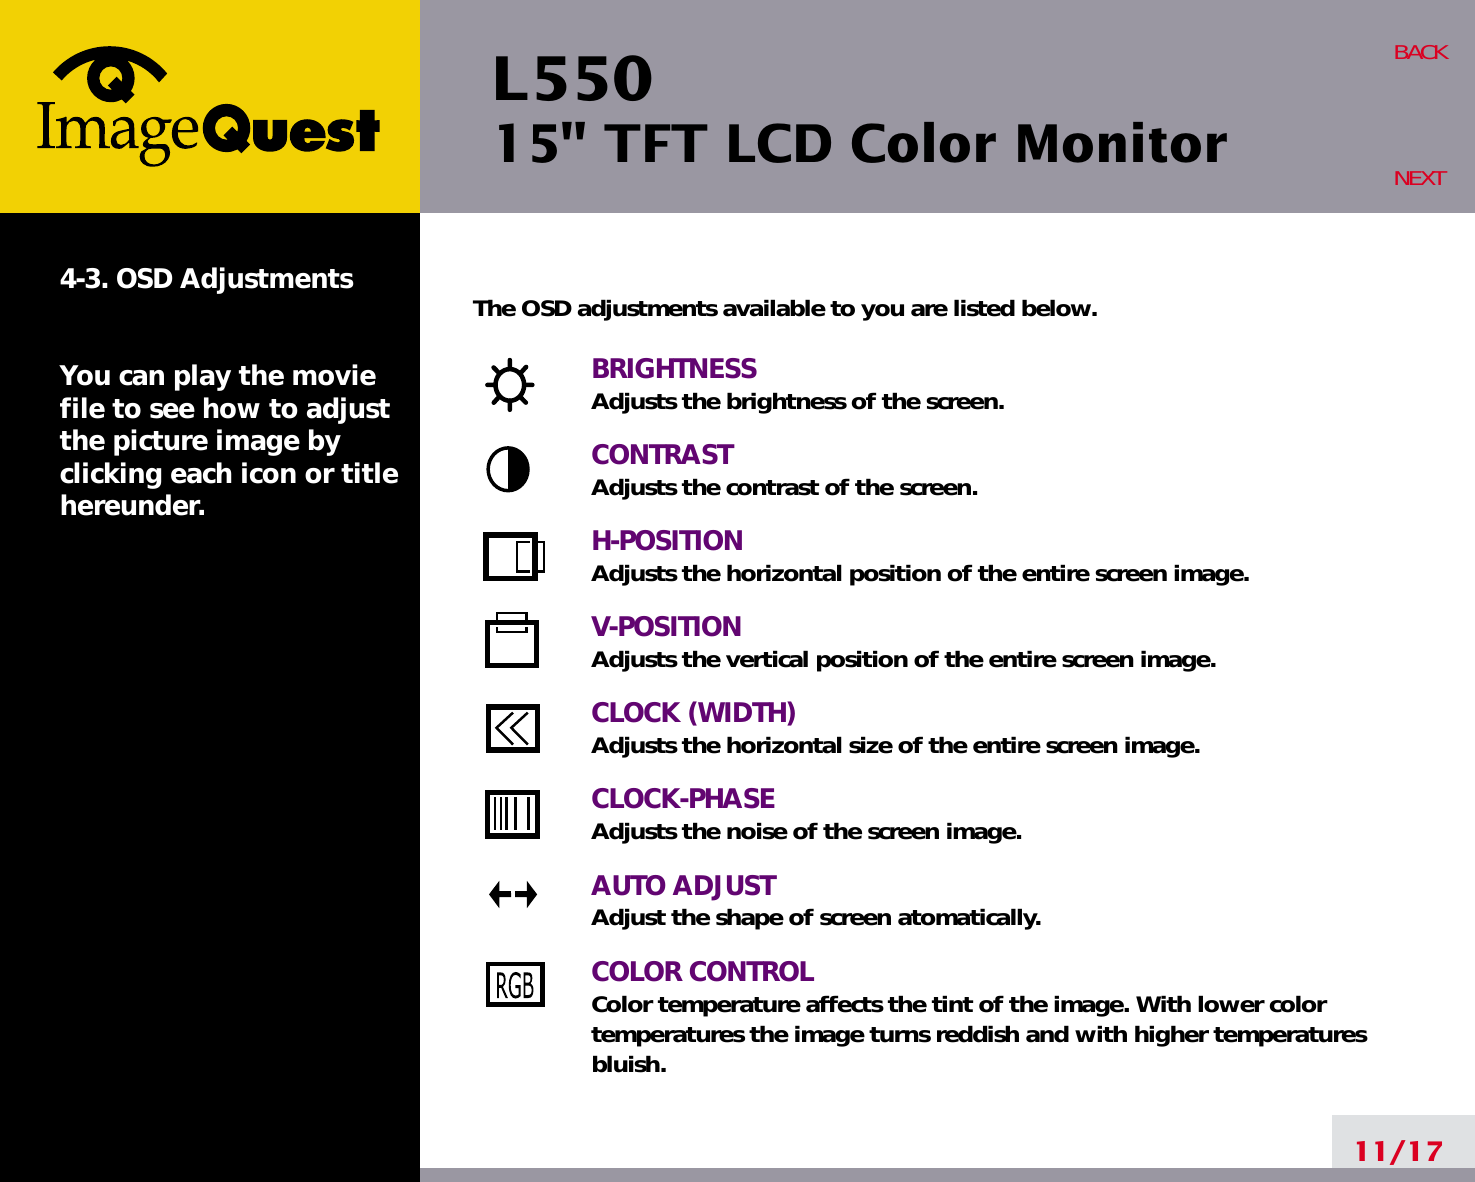 L550 15&quot; TFT LCD Color Monitor11/17BACKNEXT4-3. OSD AdjustmentsYou can play the moviefile to see how to adjustthe picture image byclicking each icon or titlehereunder.The OSD adjustments available to you are listed below.BRIGHTNESSAdjusts the brightness of the screen.CONTRASTAdjusts the contrast of the screen.H-POSITIONAdjusts the horizontal position of the entire screen image.V-POSITIONAdjusts the vertical position of the entire screen image.CLOCK (WIDTH)Adjusts the horizontal size of the entire screen image.CLOCK-PHASEAdjusts the noise of the screen image.AUTO ADJUSTAdjust the shape of screen atomatically.COLOR CONTROLColor temperature affects the tint of the image. With lower color temperatures the image turns reddish and with higher temperatures bluish.